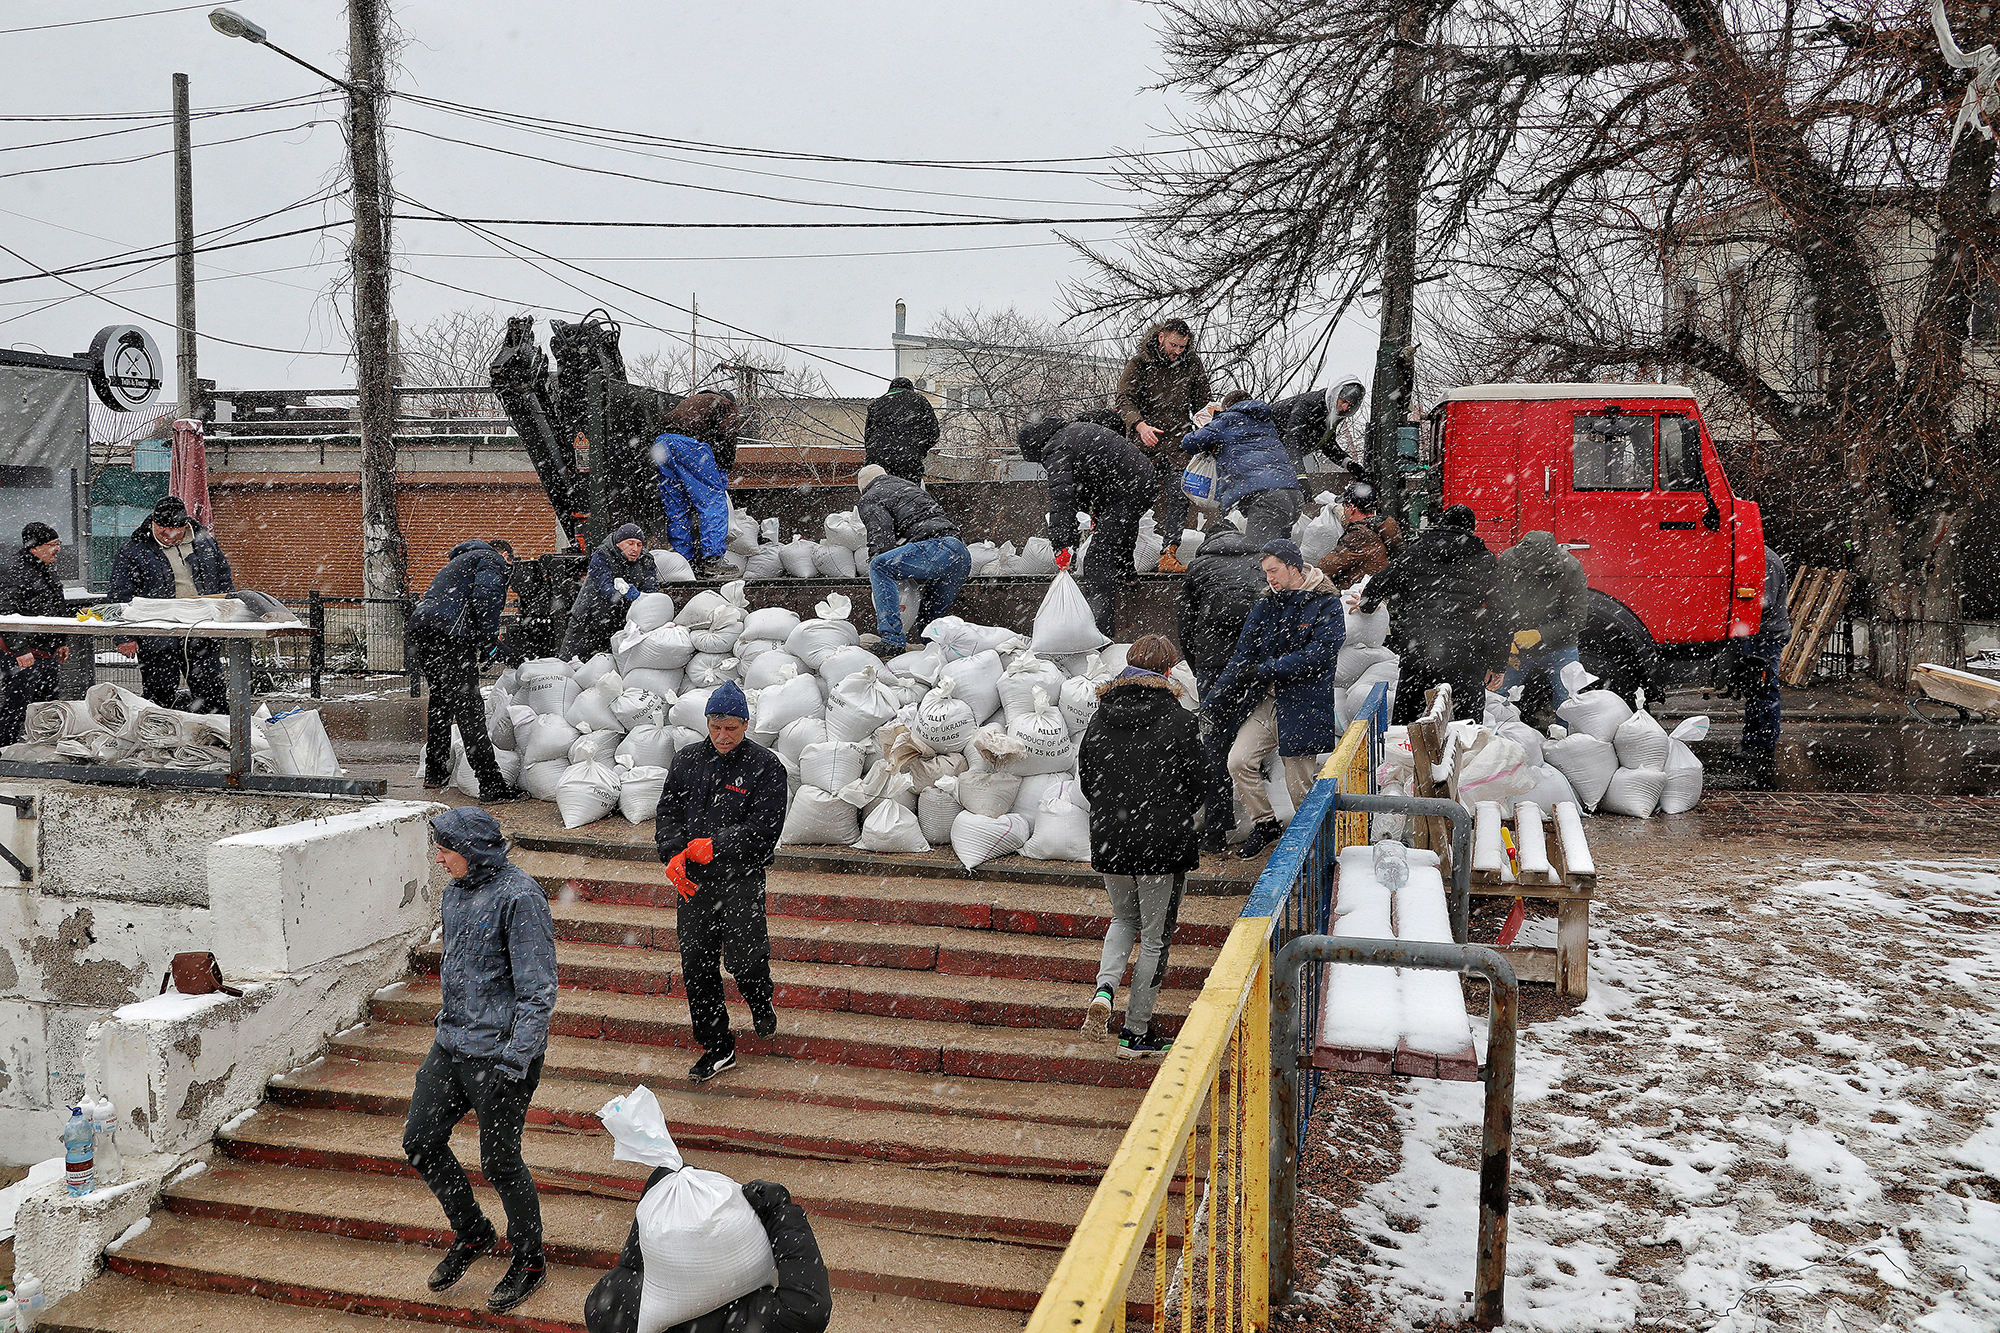 Local residents load sand bags onto the truck to defend the city, Odessa, Ukraine, on March 1.